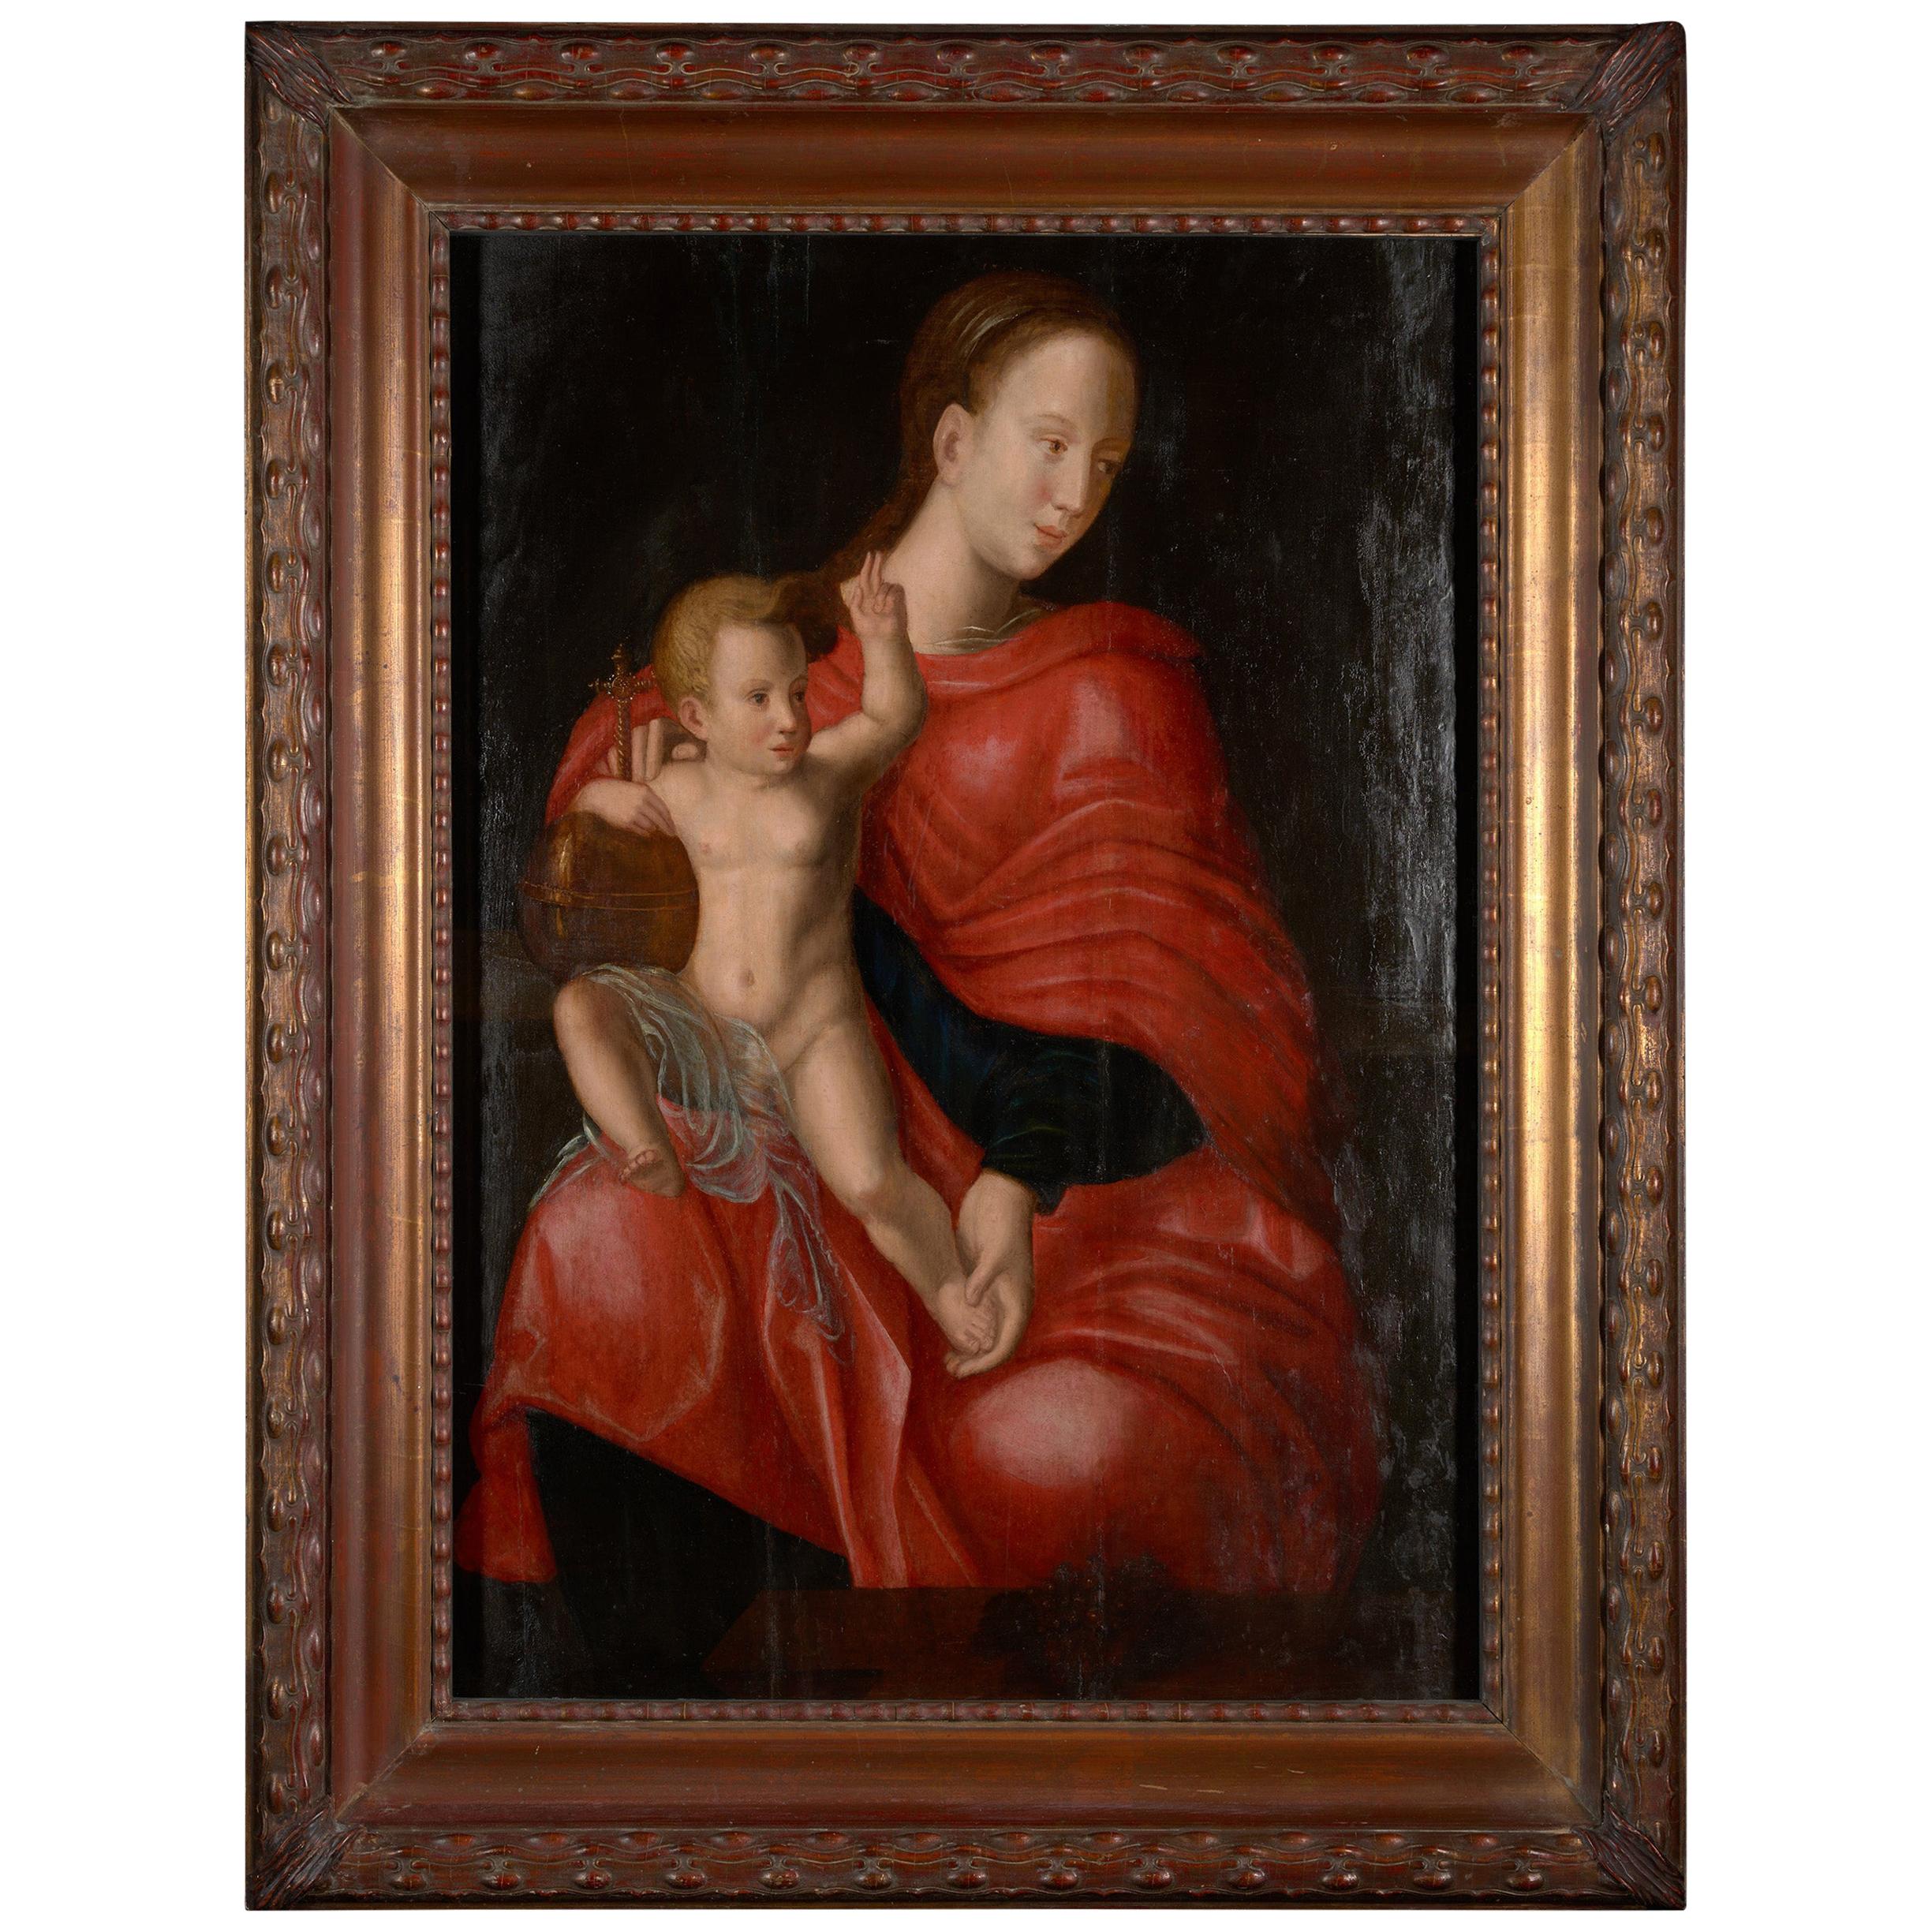 This lovely 17th century painting was made in the last part of the European Renaissance period, also known as the high renaissance, late 17th century. This scene depicts the Madonna with her Child. Mary is the center of the panel, wearing a scarlet